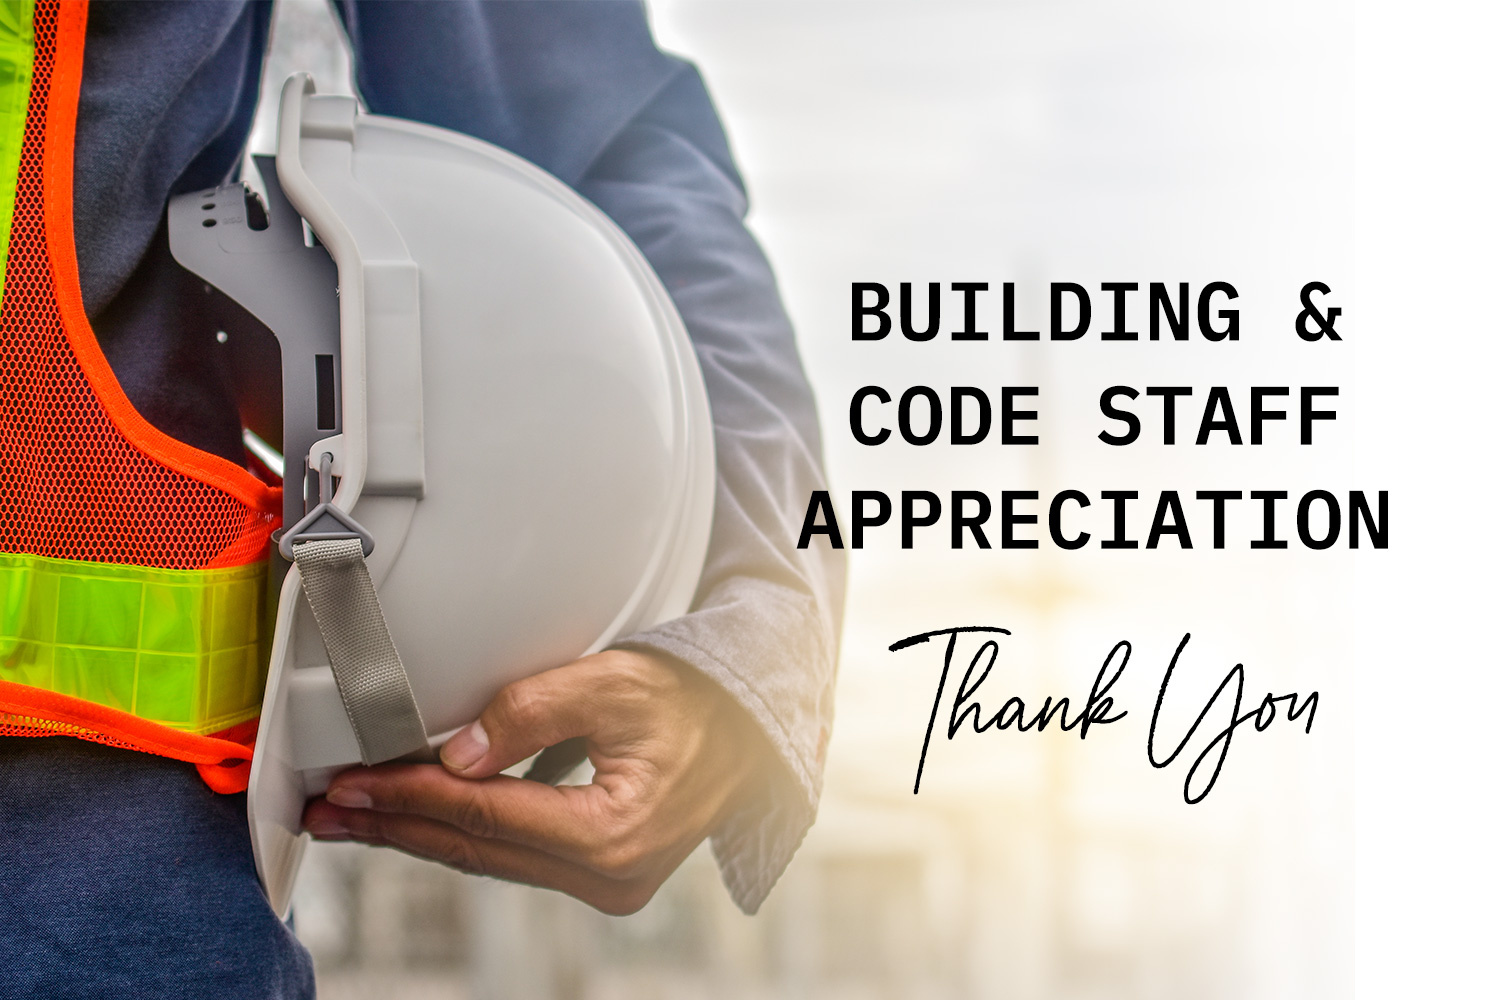 Building and Code Staff Appreciation Day